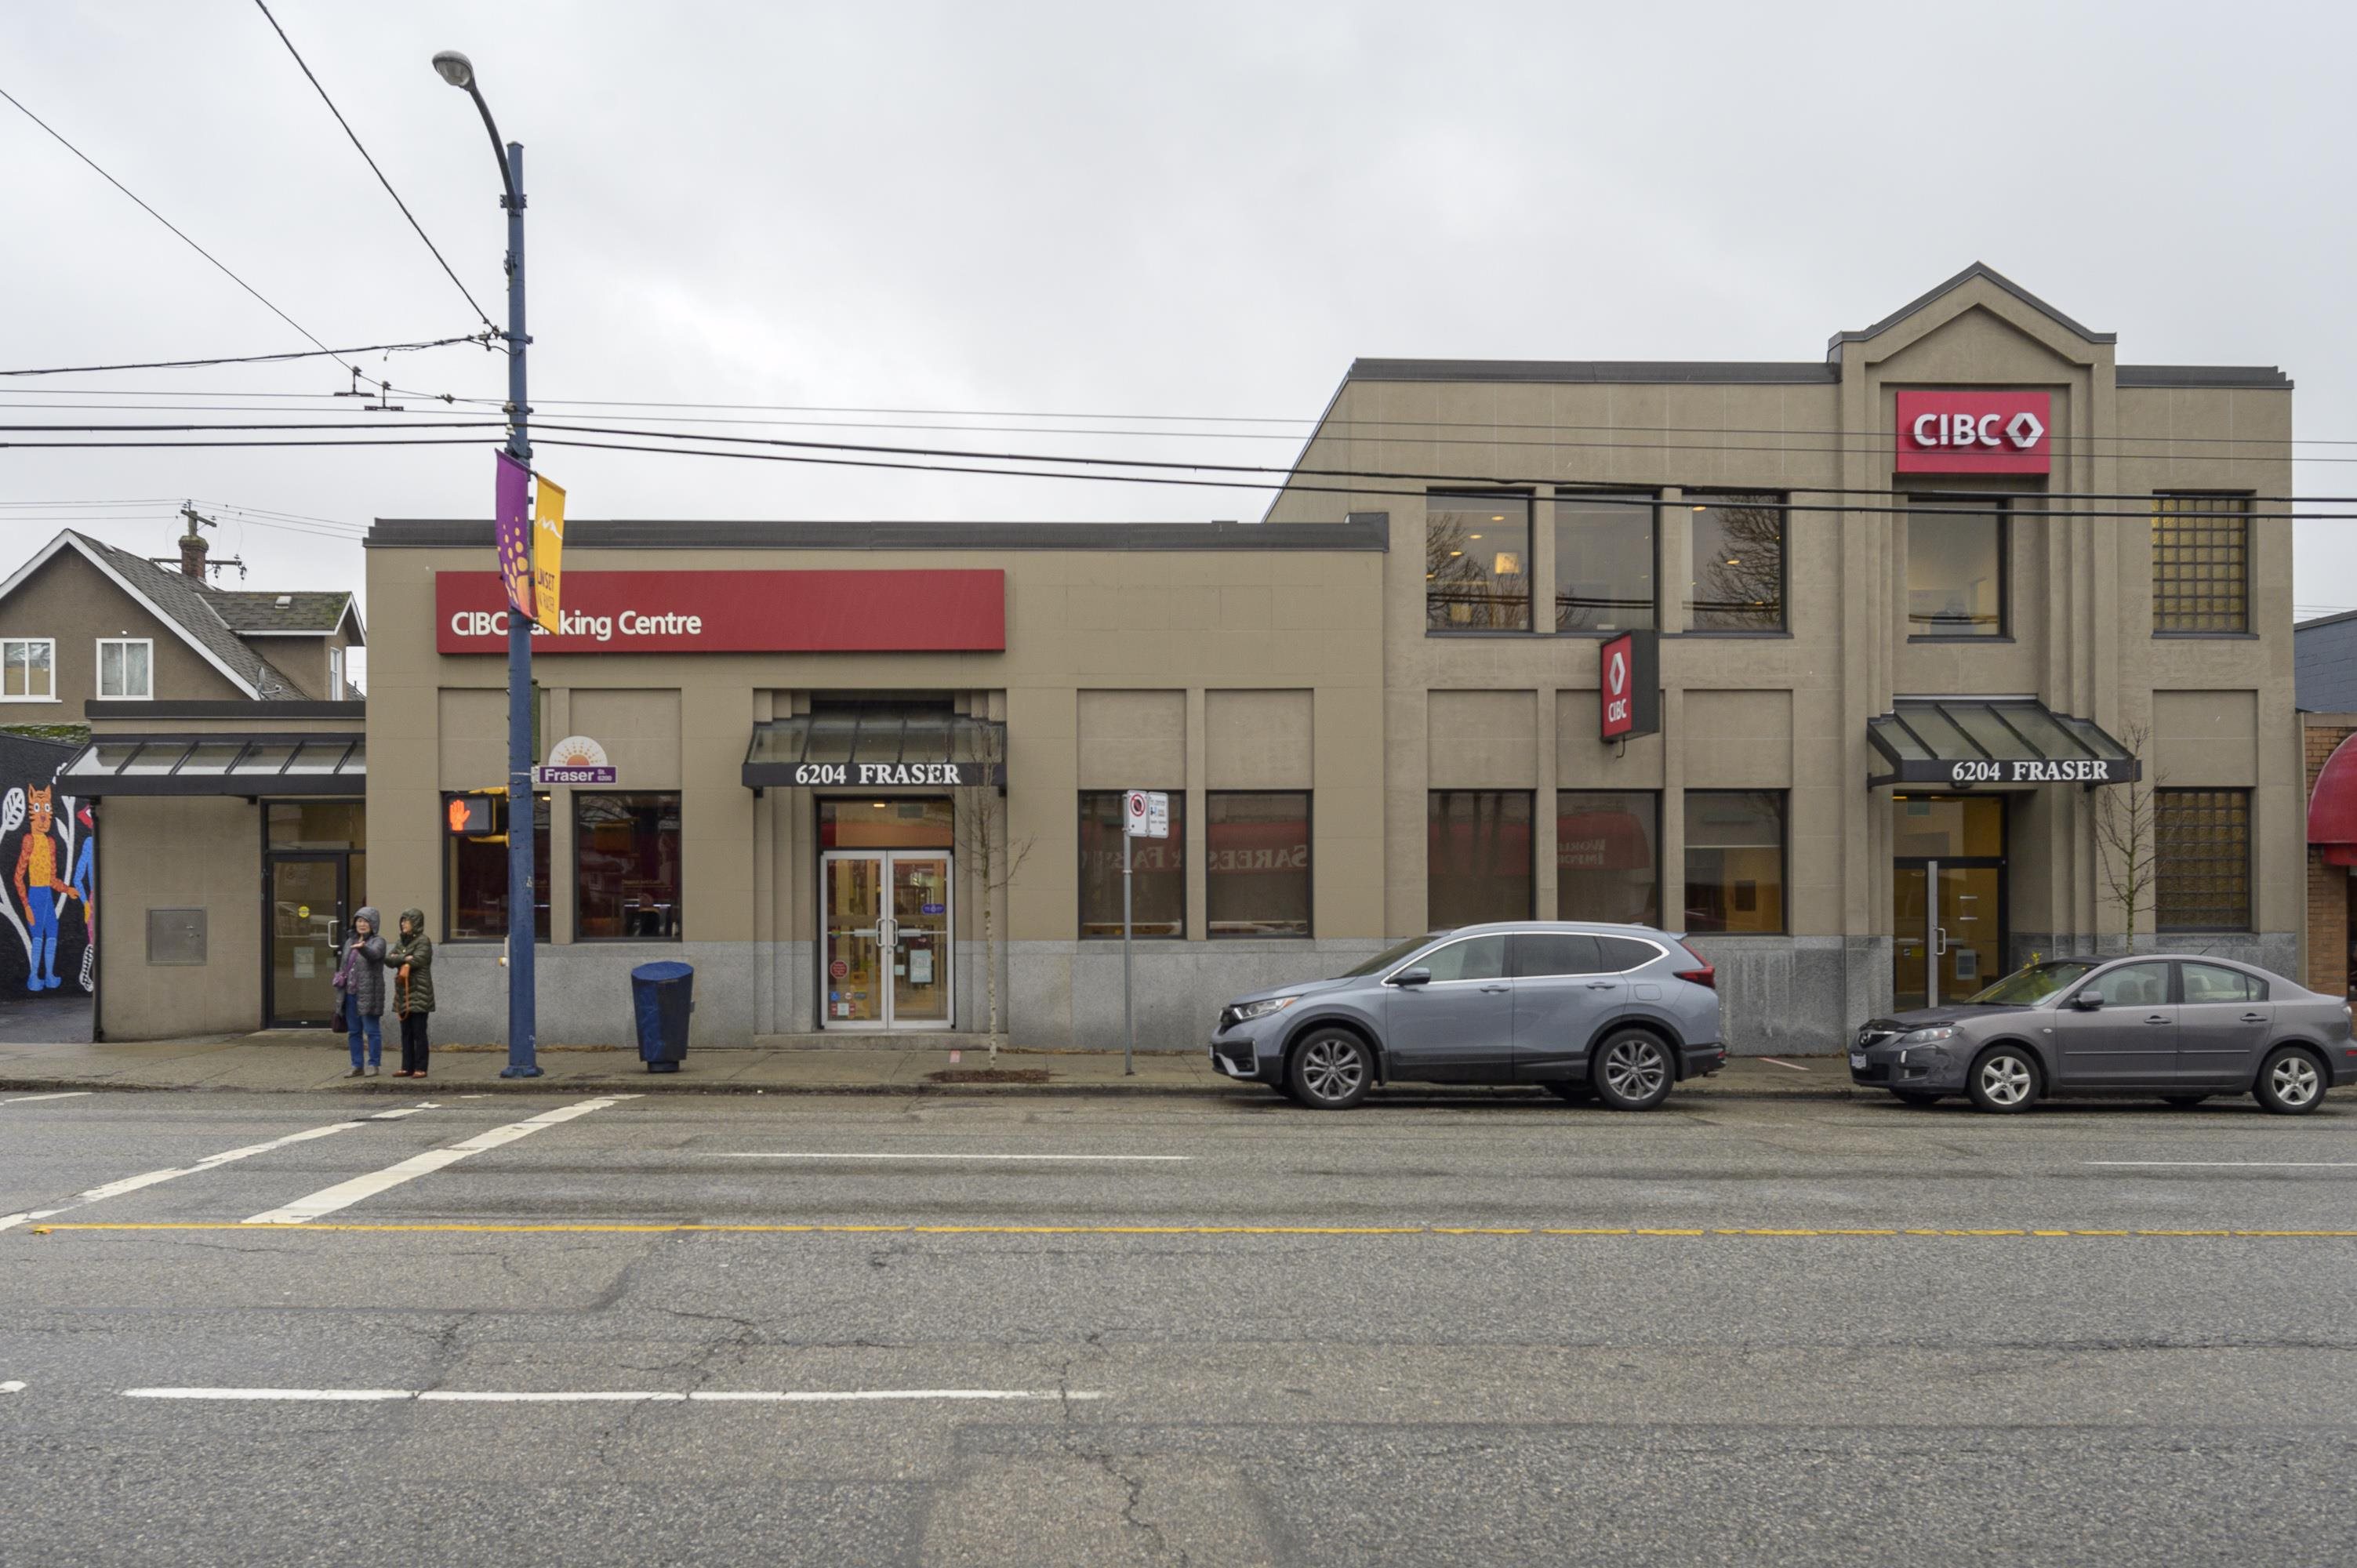 Michael Sung, 6204 FRASER STREET, Vancouver, British Columbia, Retail,For Lease ,C8048734